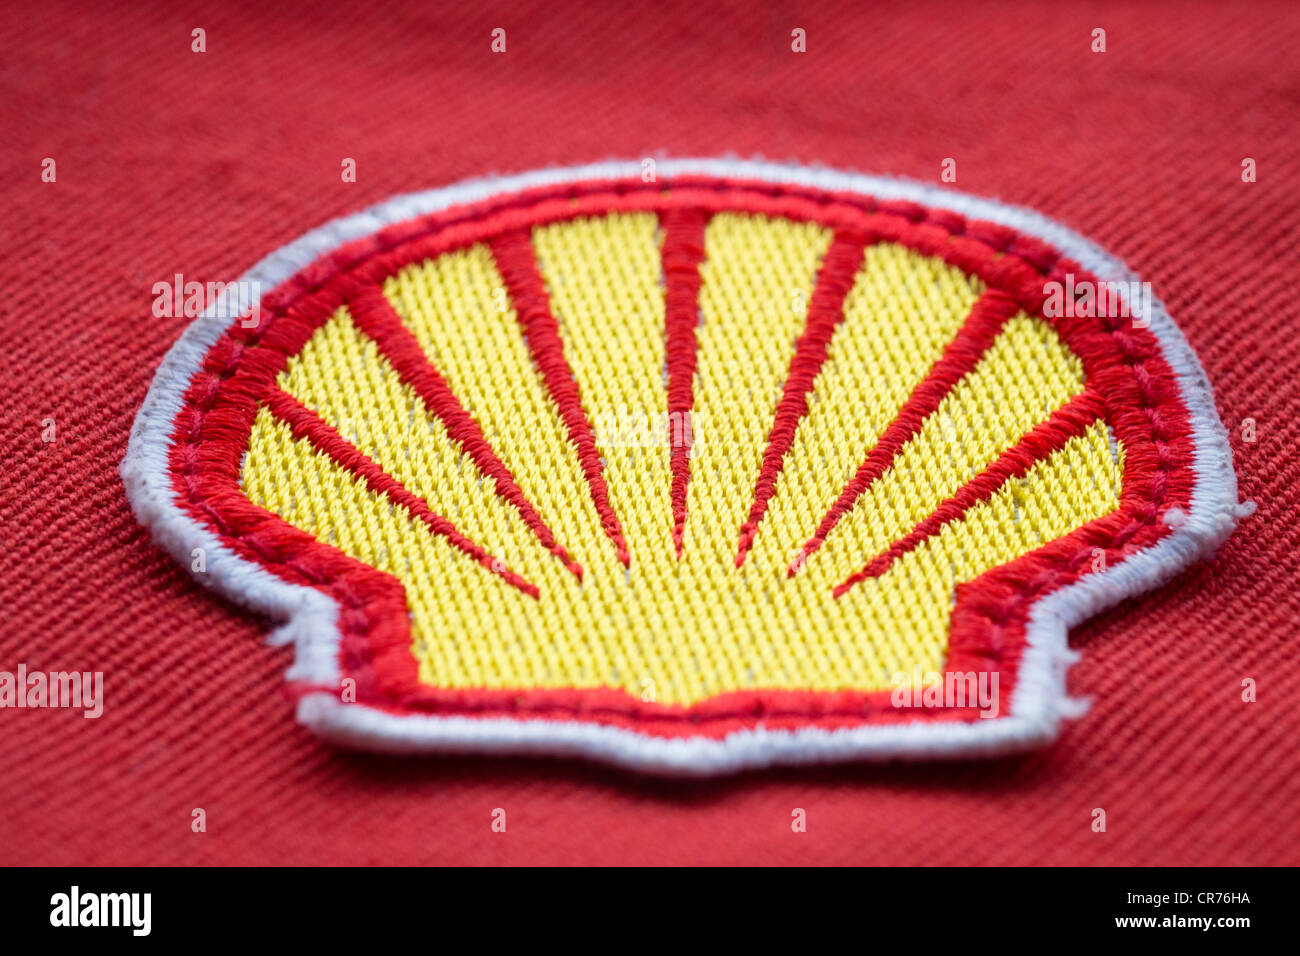 Detail of cloth logo patch on safety overalls of worker for Royal Dutch Shell oil company. Stock Photo